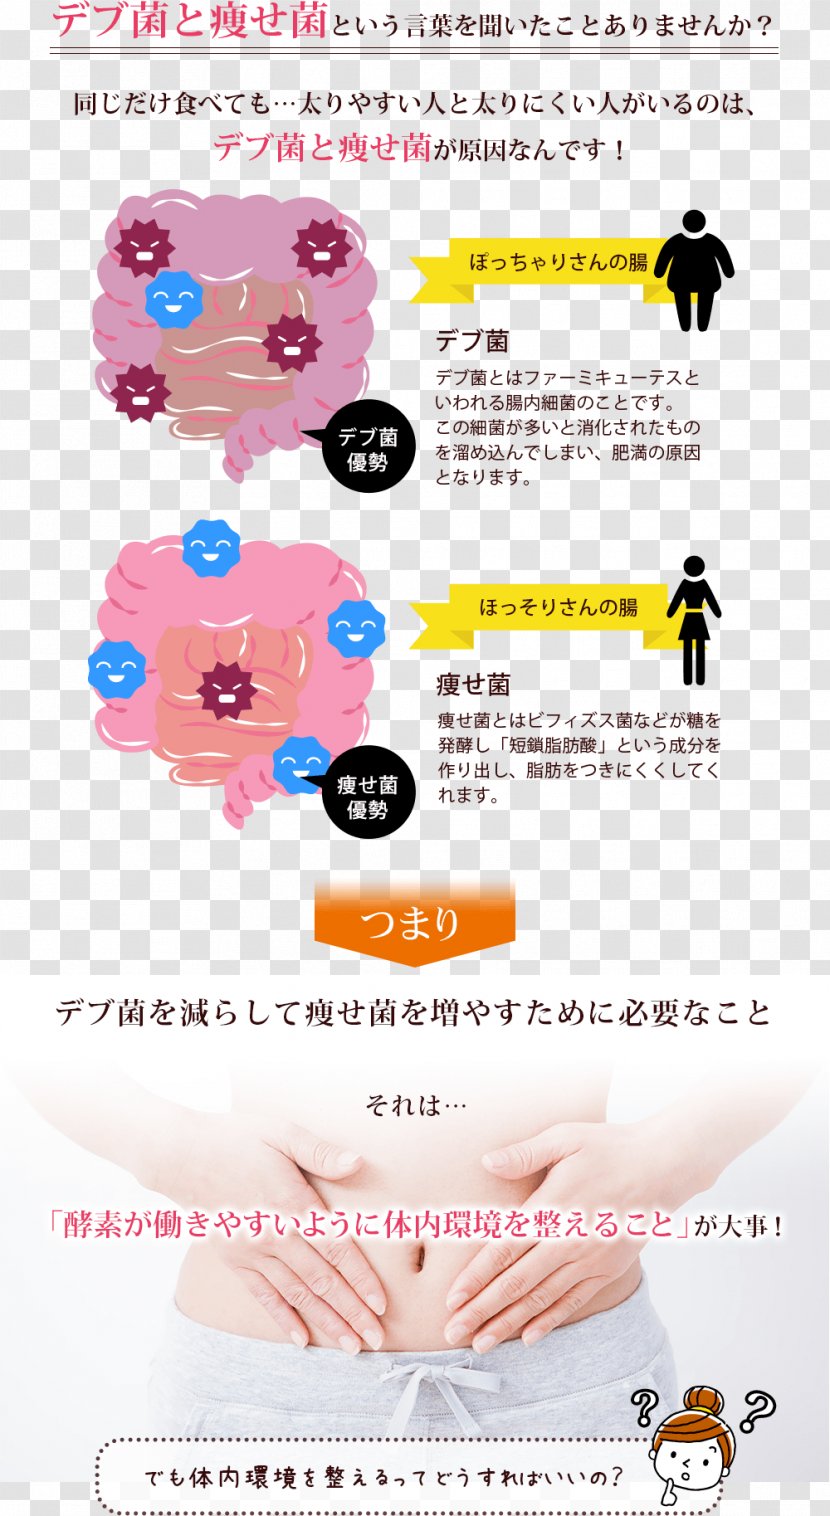 Aojiru Dietary Supplement Dieting Paper デブ - Smile - Intestine Transparent PNG